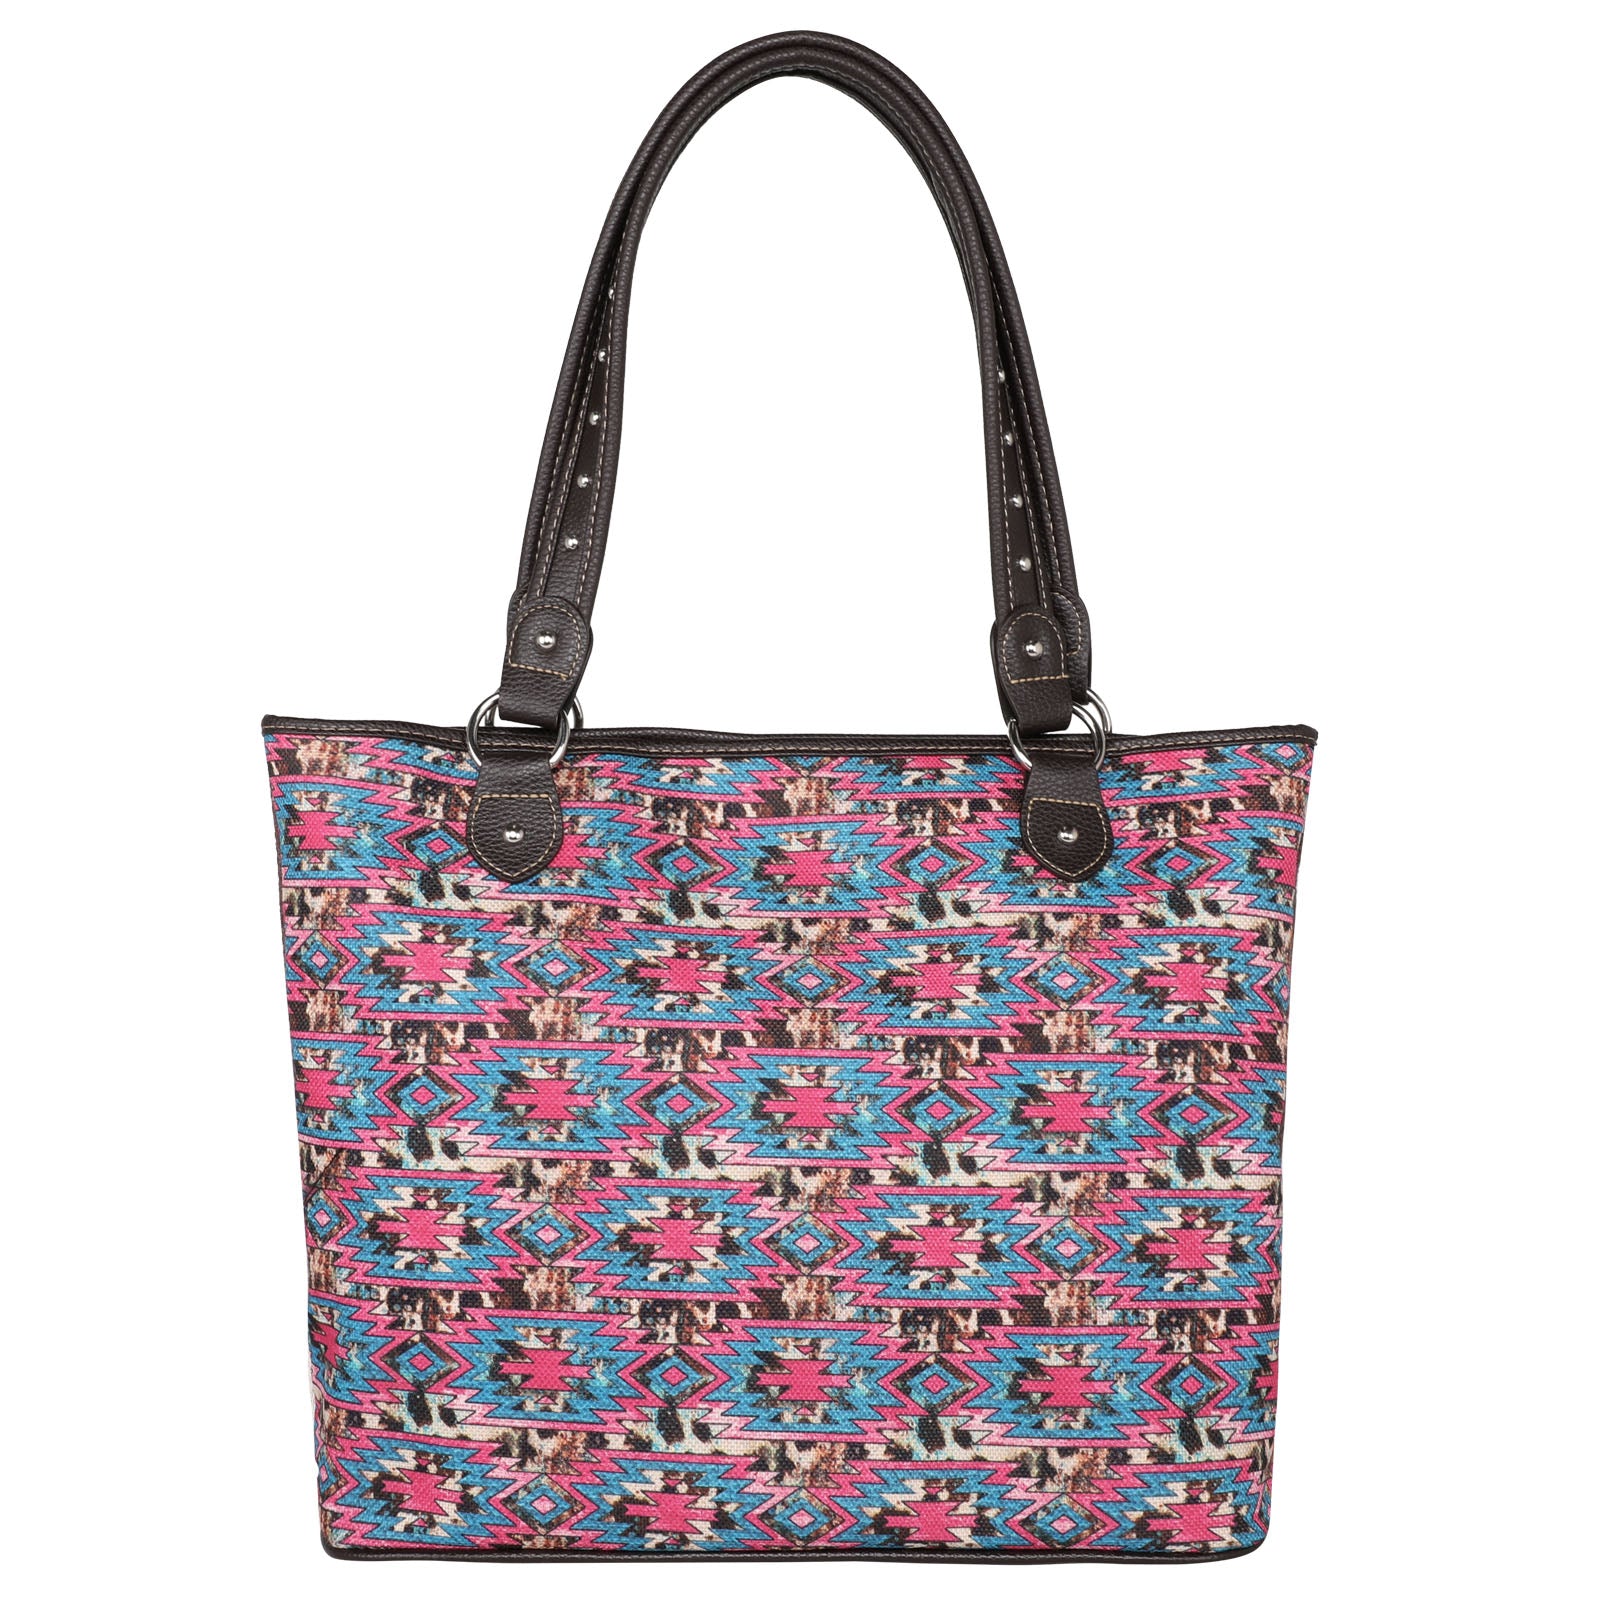 Medium leather-trimmed printed canvas tote